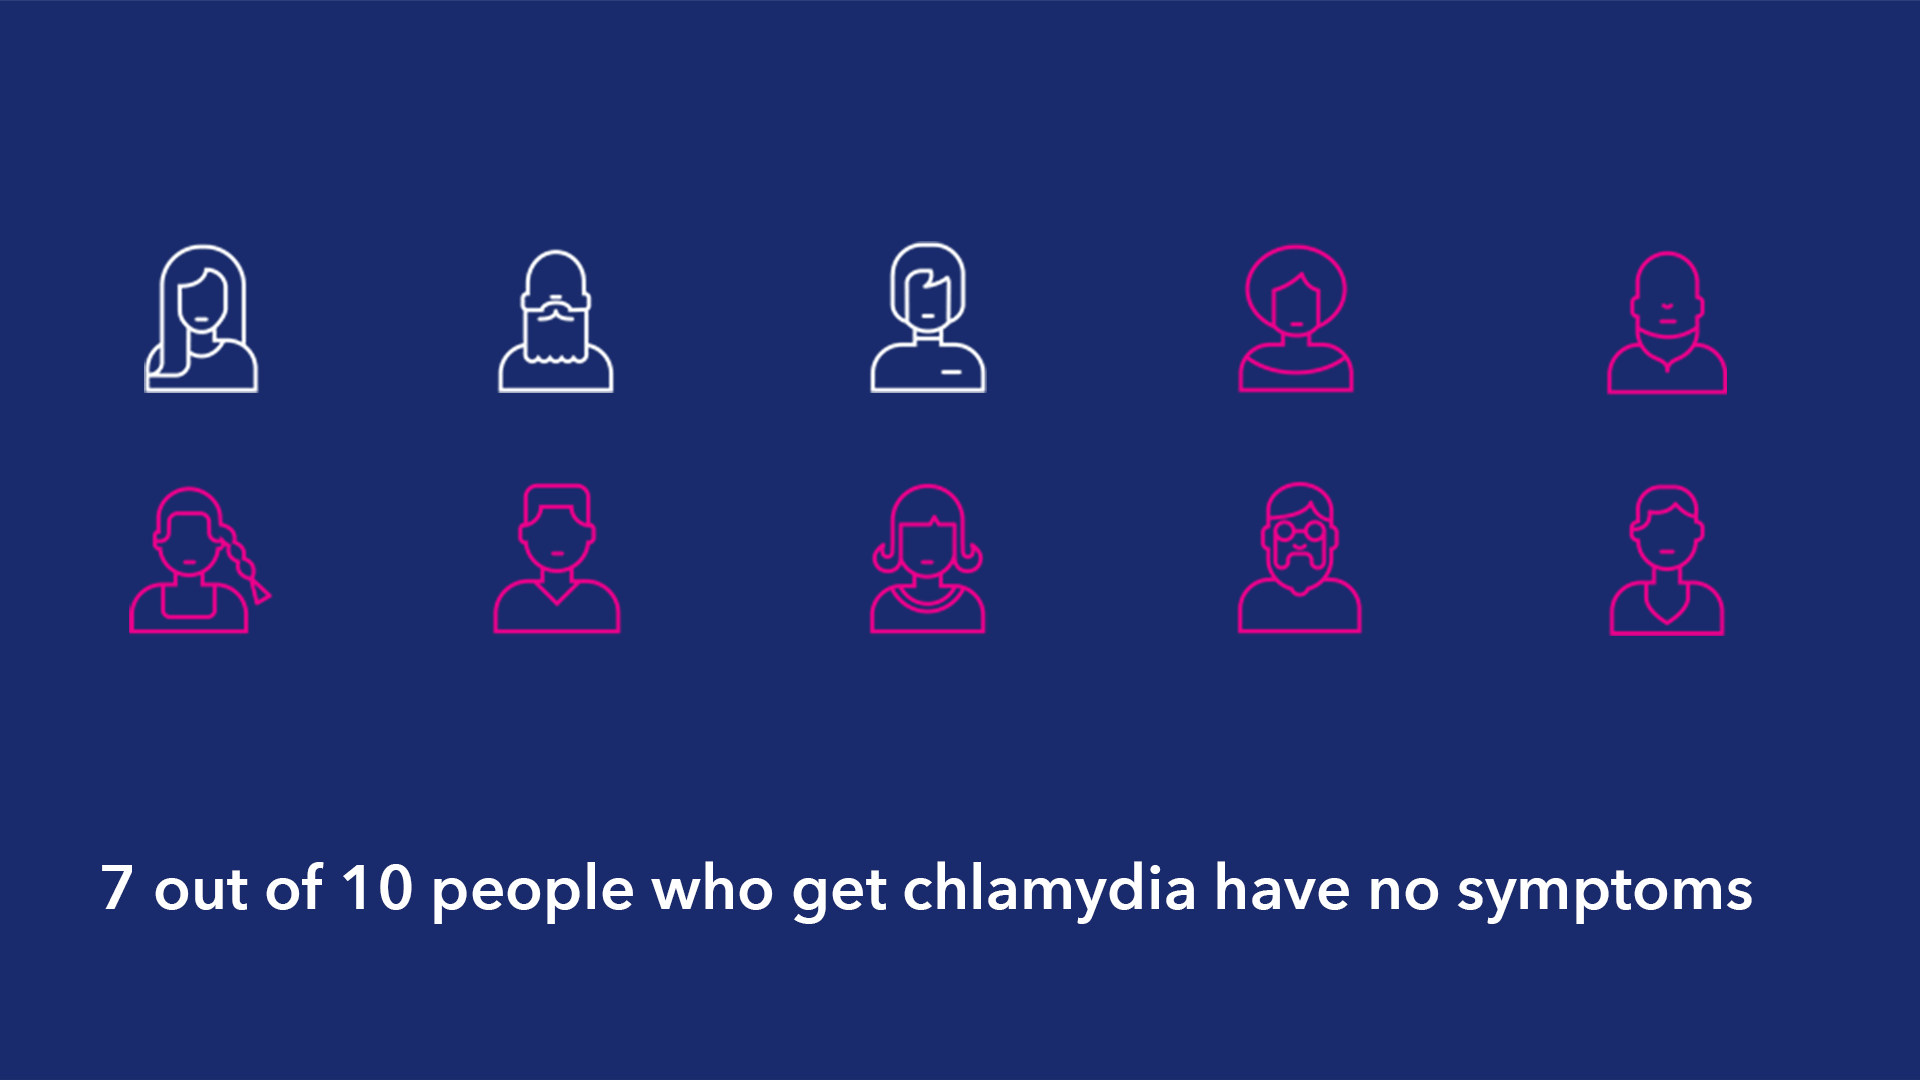 7/10 people show no symptoms, which is why chlamydia testing is so important